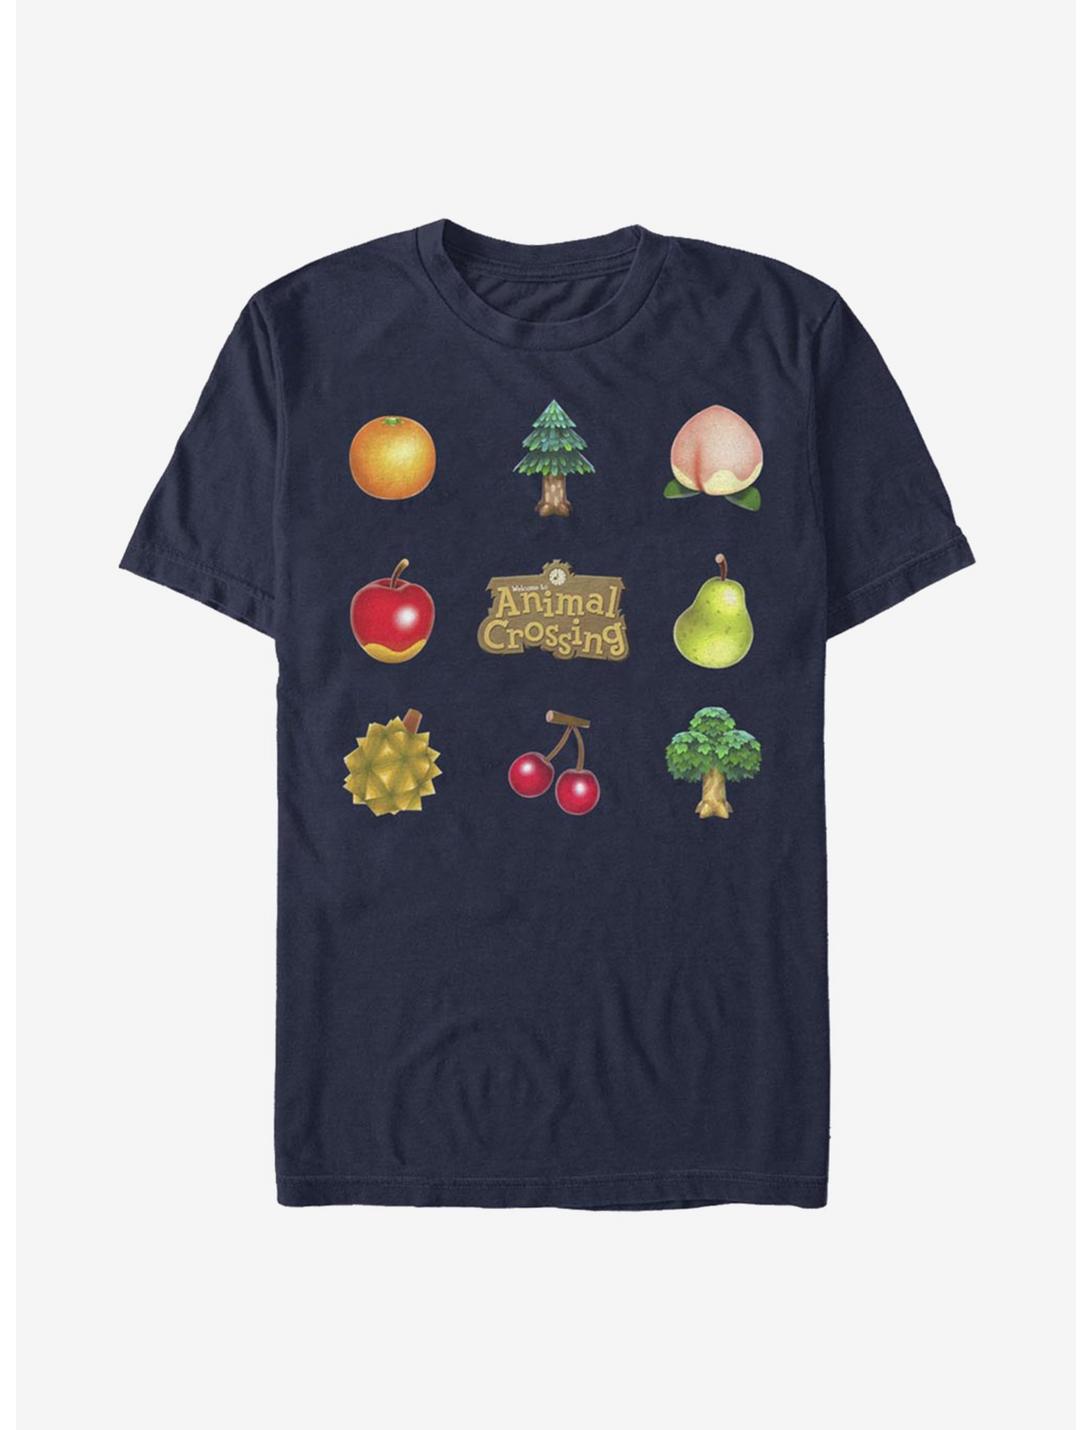 Animal Crossing Fruit And Trees T-Shirt, NAVY, hi-res